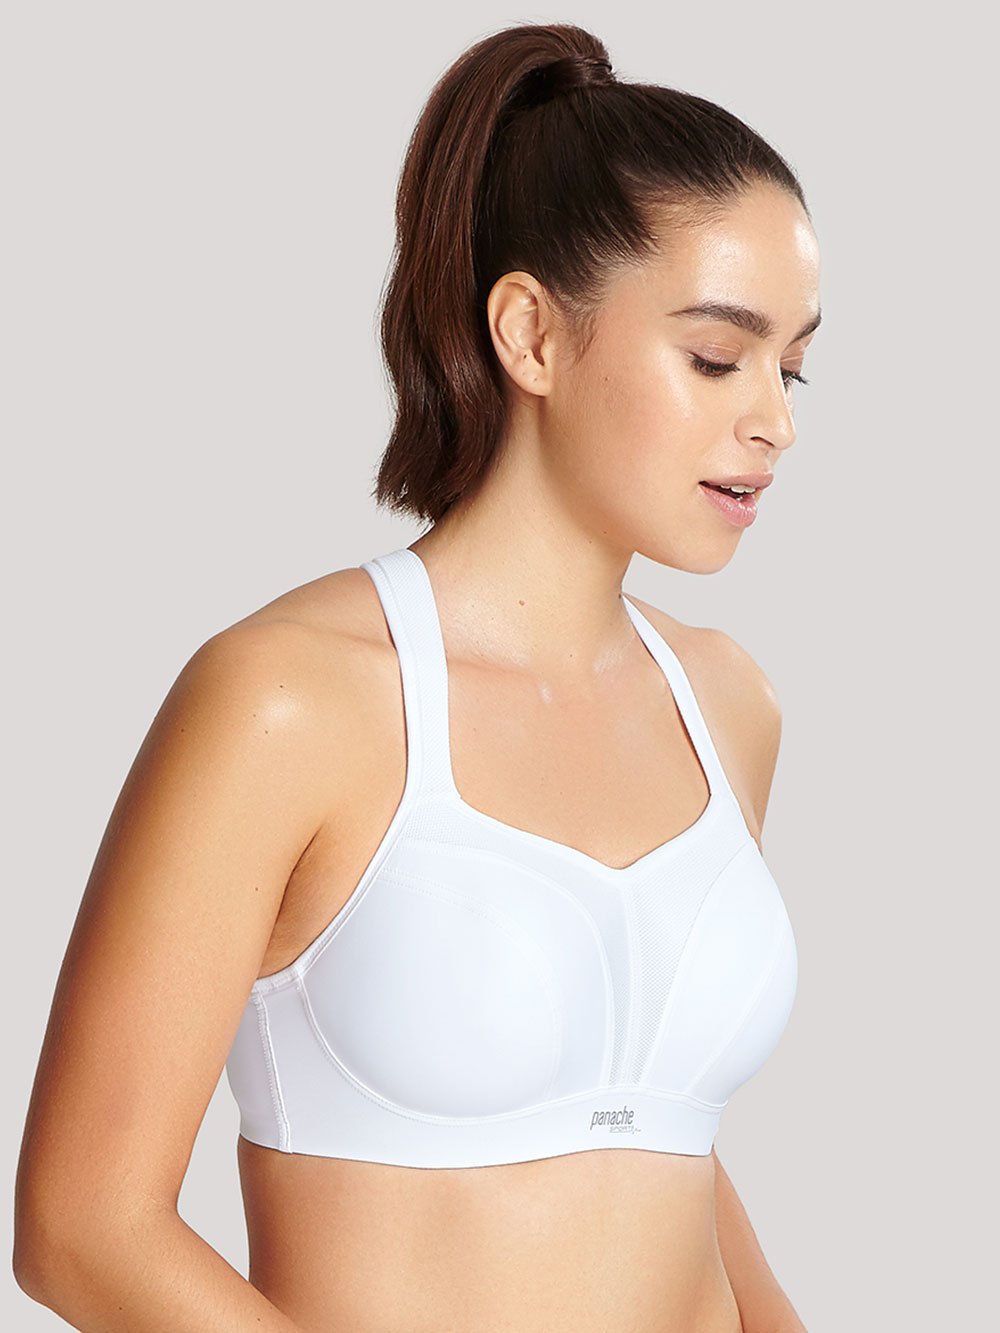 4 Of The Best Bras For Lifting Sagging Breasts - ParfaitLingerie.com - Blog